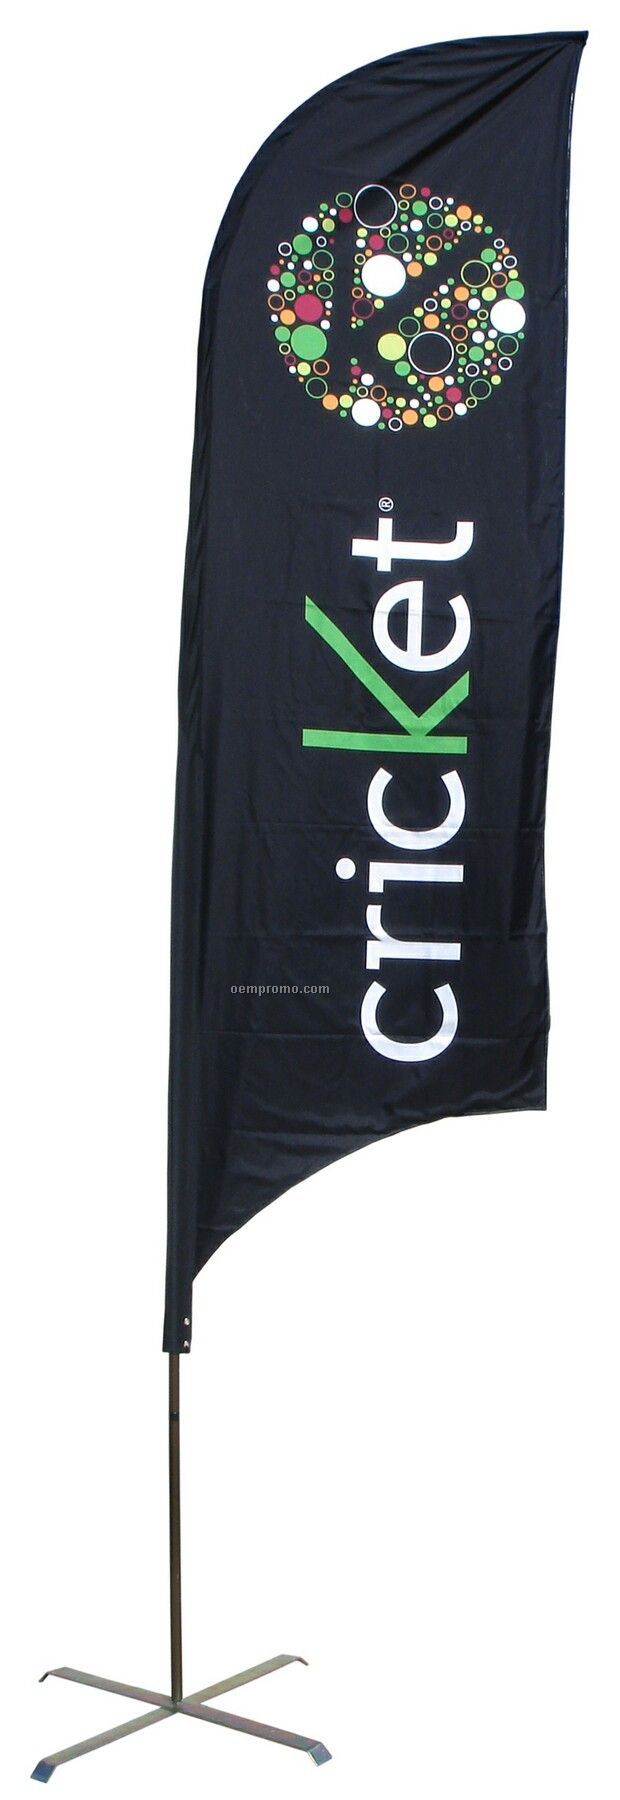 12' Single Sided Bow Banner System (Full Color Digital)